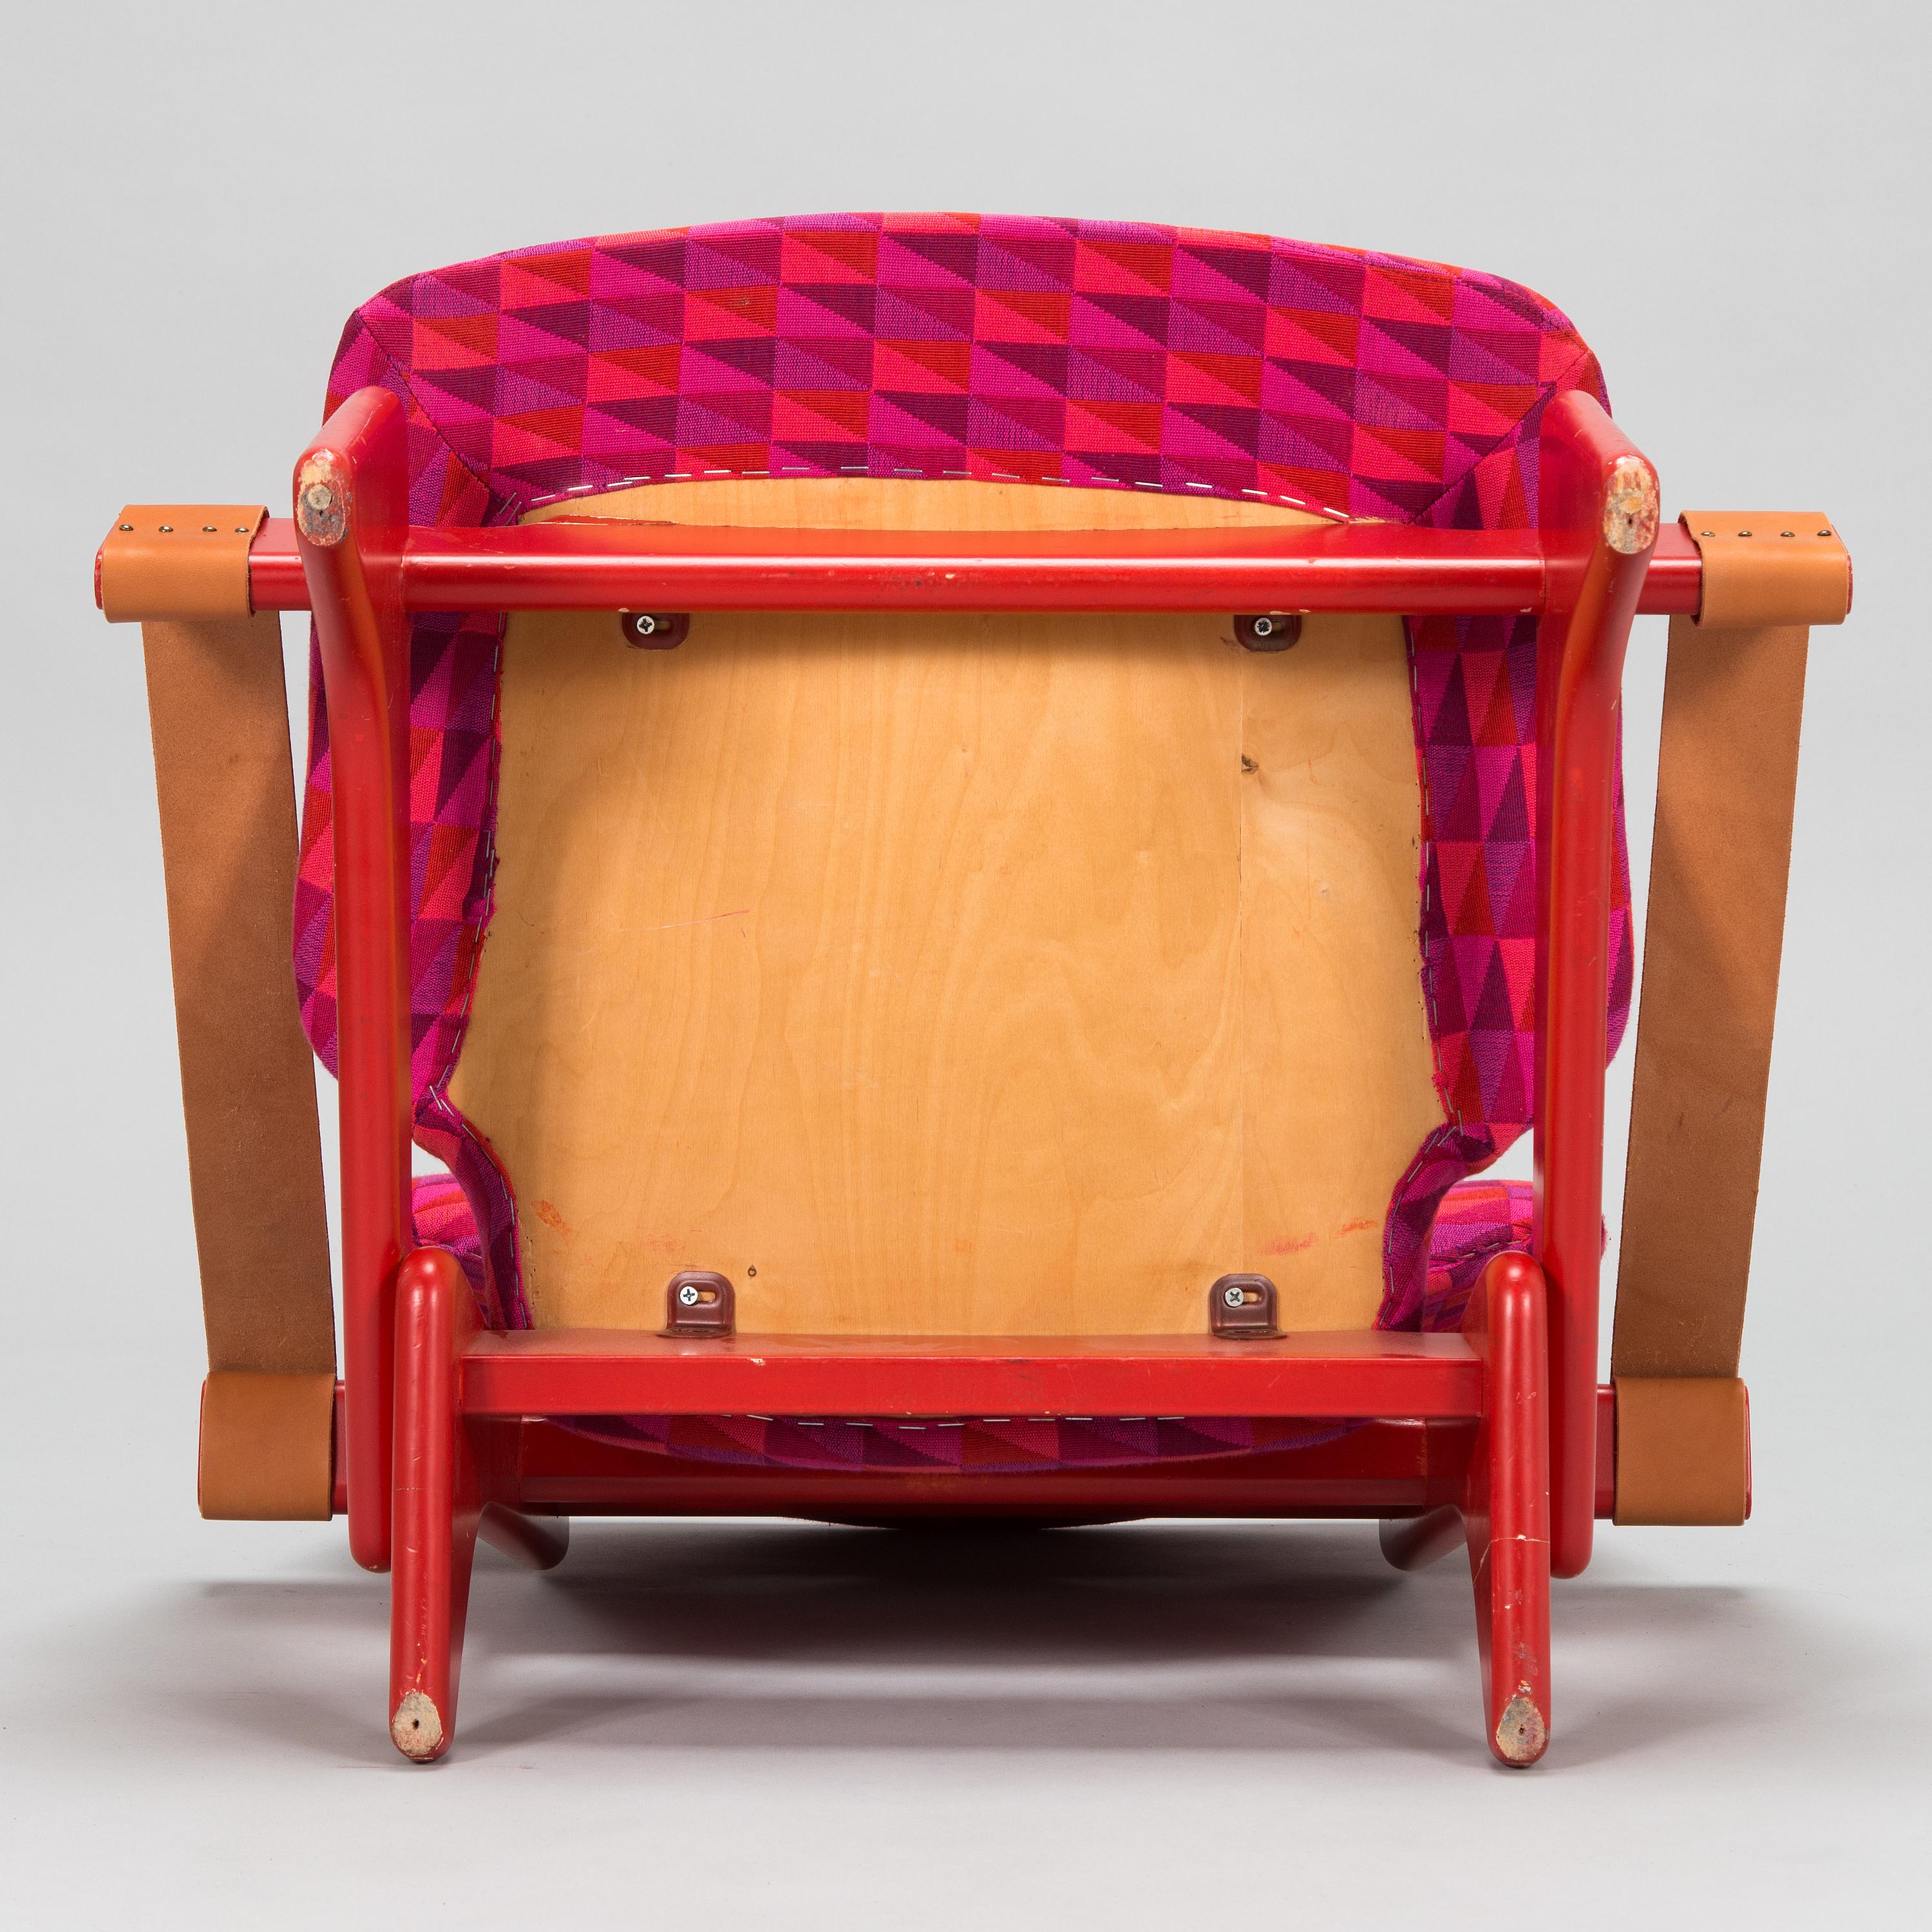 Olof Ottelin armchair 'Jumbo' N° 174 for Keravan Stockmann Oy Finland 1960
Wooden frame lacquered in red, upholstered with a red and fuchsia patterned fabric, marked with a pen underneath Jumbo 174.
Overall condition and leather straps are good,